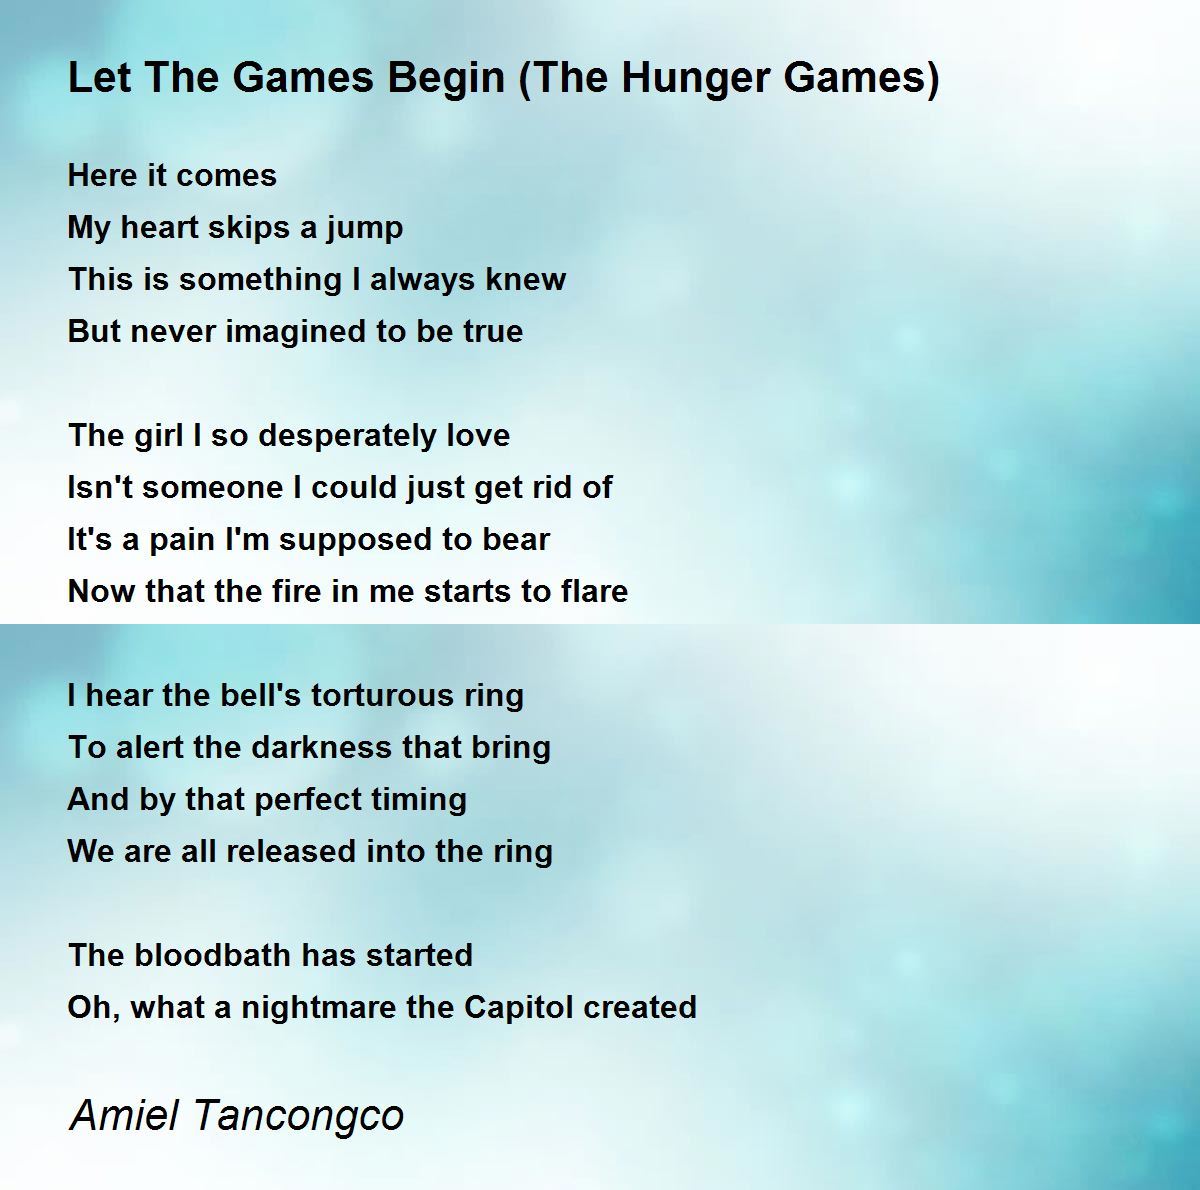 Let The Games Begin (The Hunger Games) - Let The Games Begin (The Hunger  Games) Poem by Amiel Tancongco